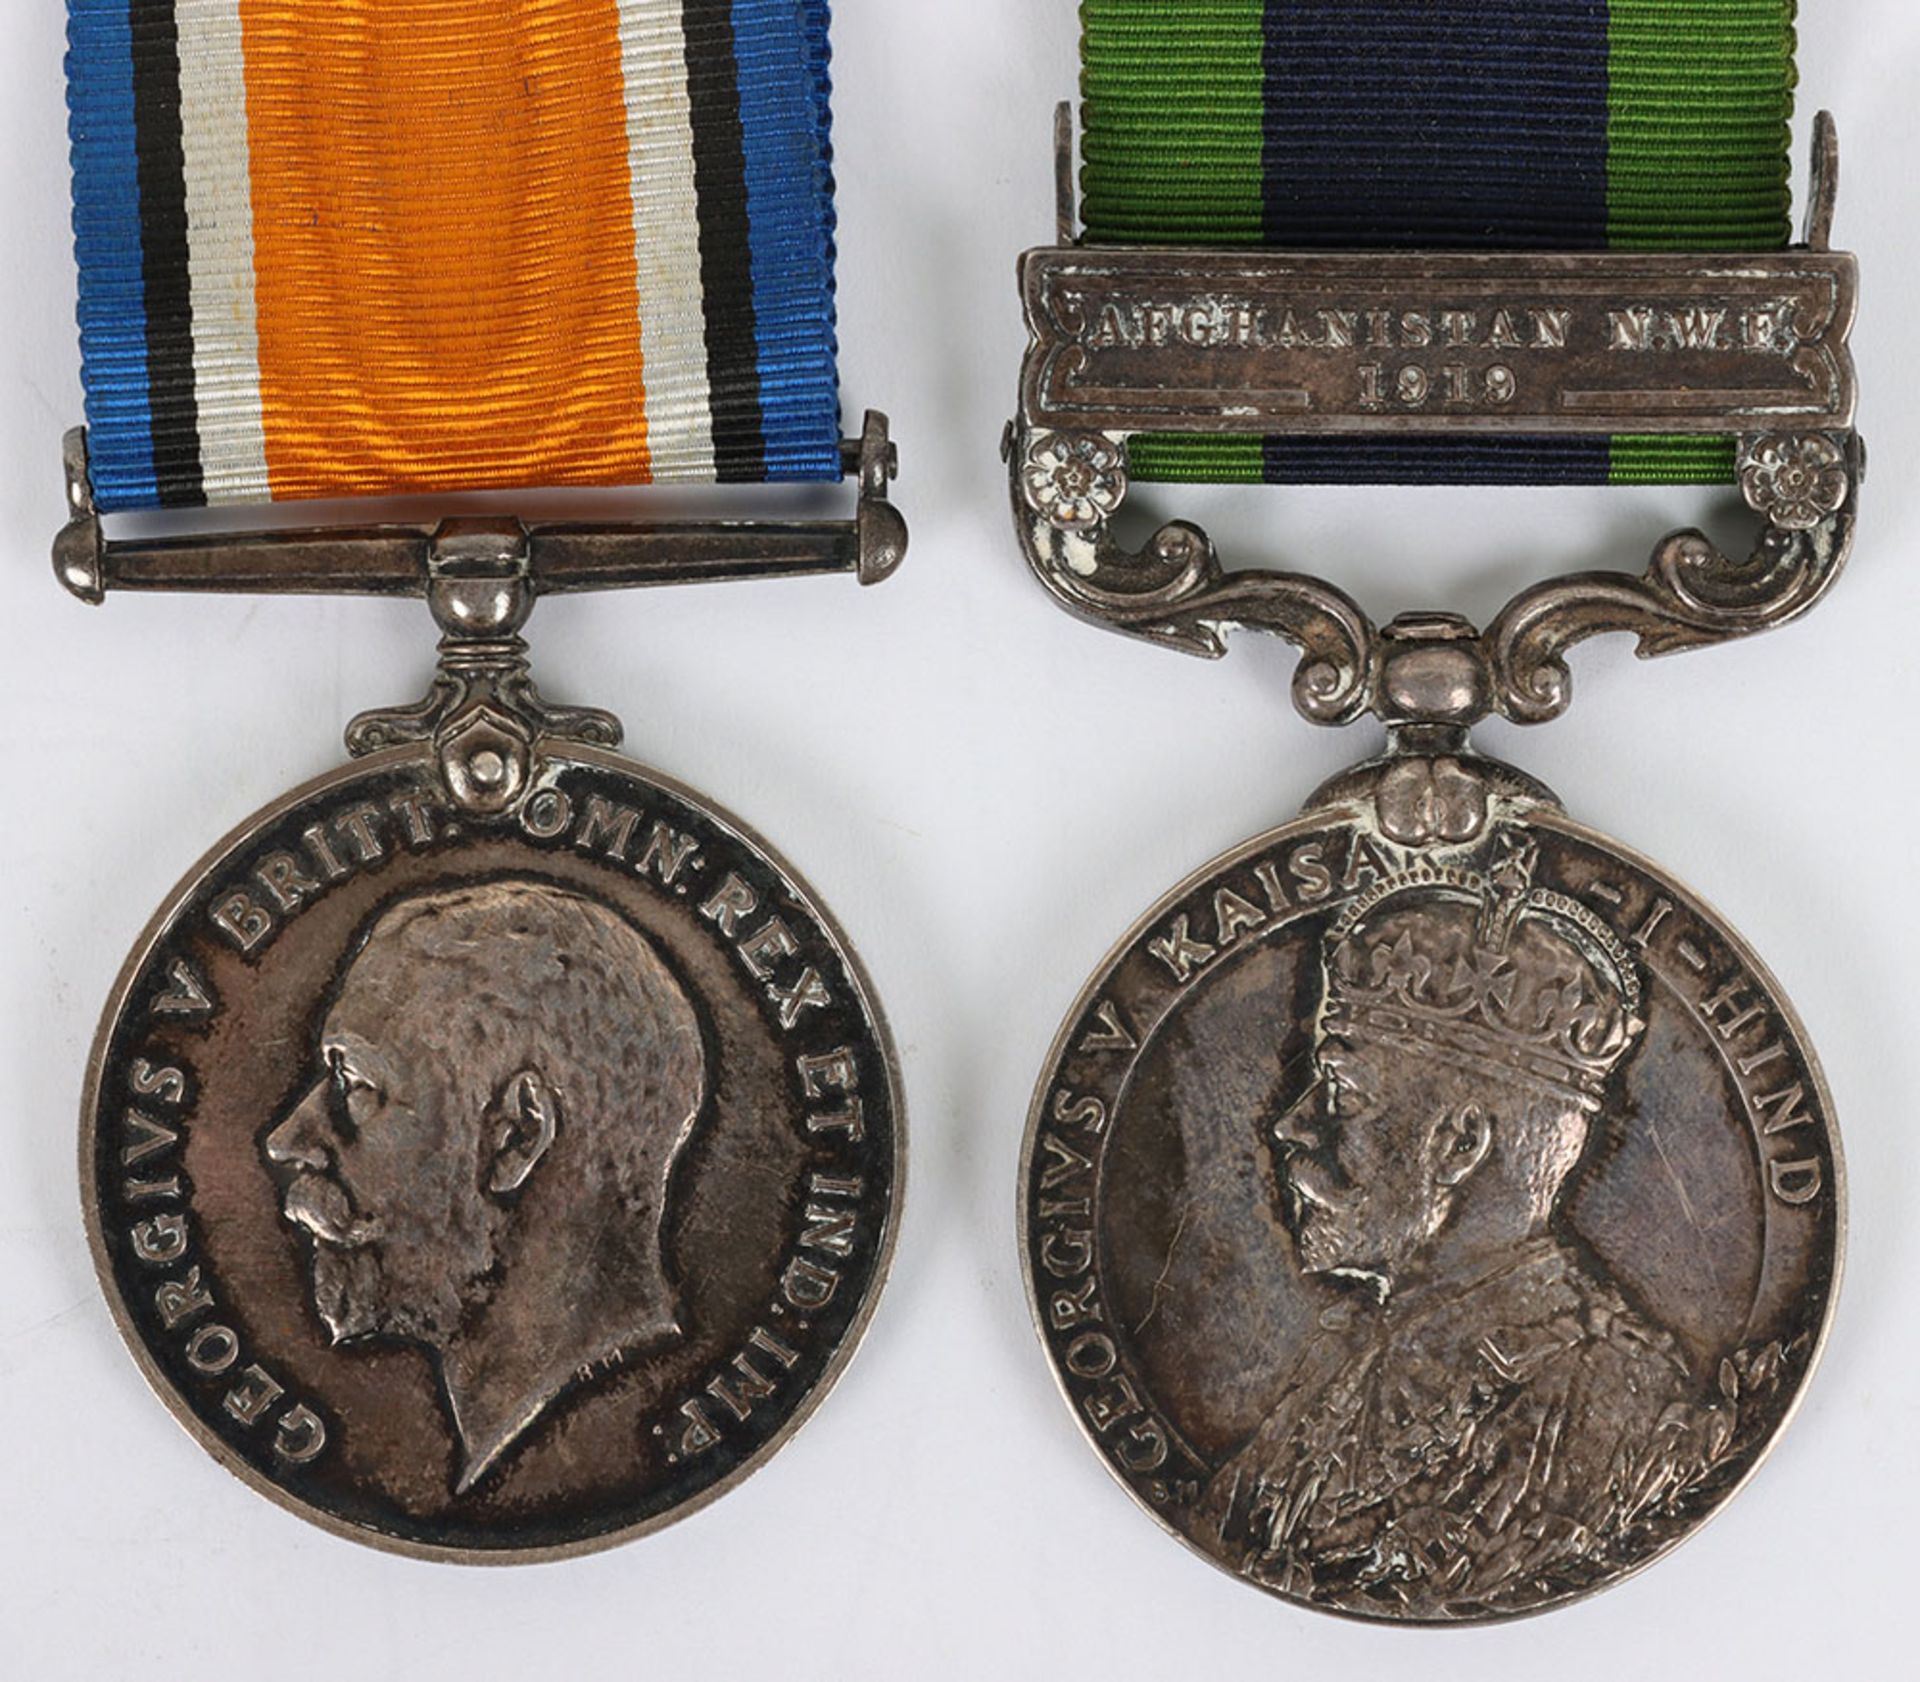 Campaign Meda Pair for Service in the Great War and the Northwest Frontier with the Royal Army Medic